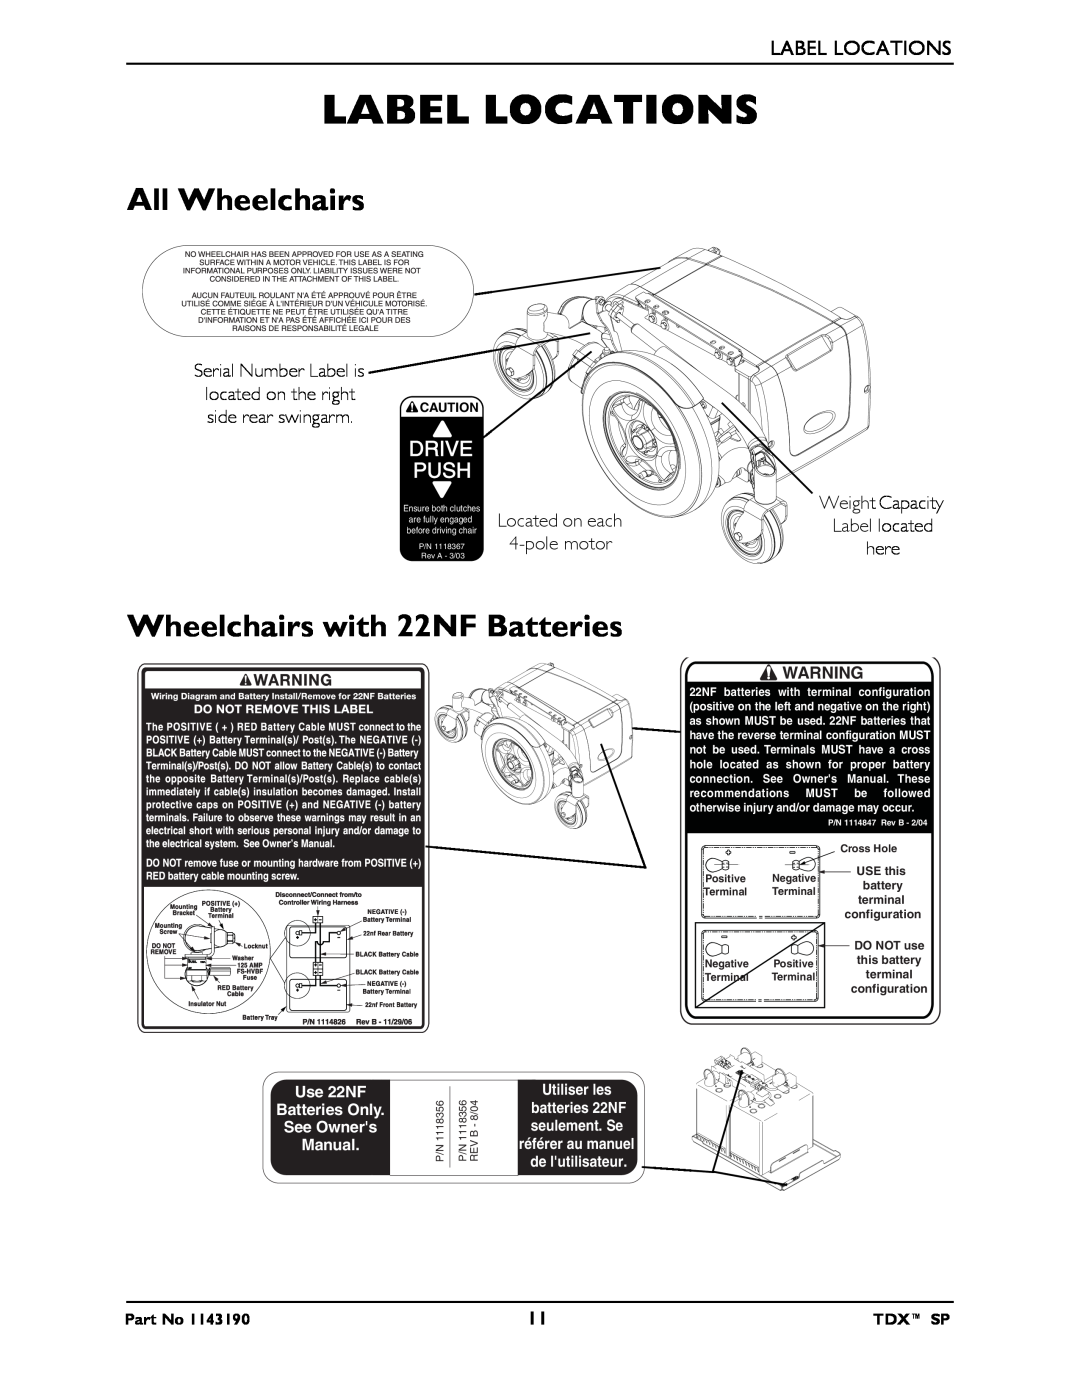 Invacare SP Label Locations, All Wheelchairs, Wheelchairs with 22NF Batteries, Drive Push, Use 22NF, Utiliser les, Manual 